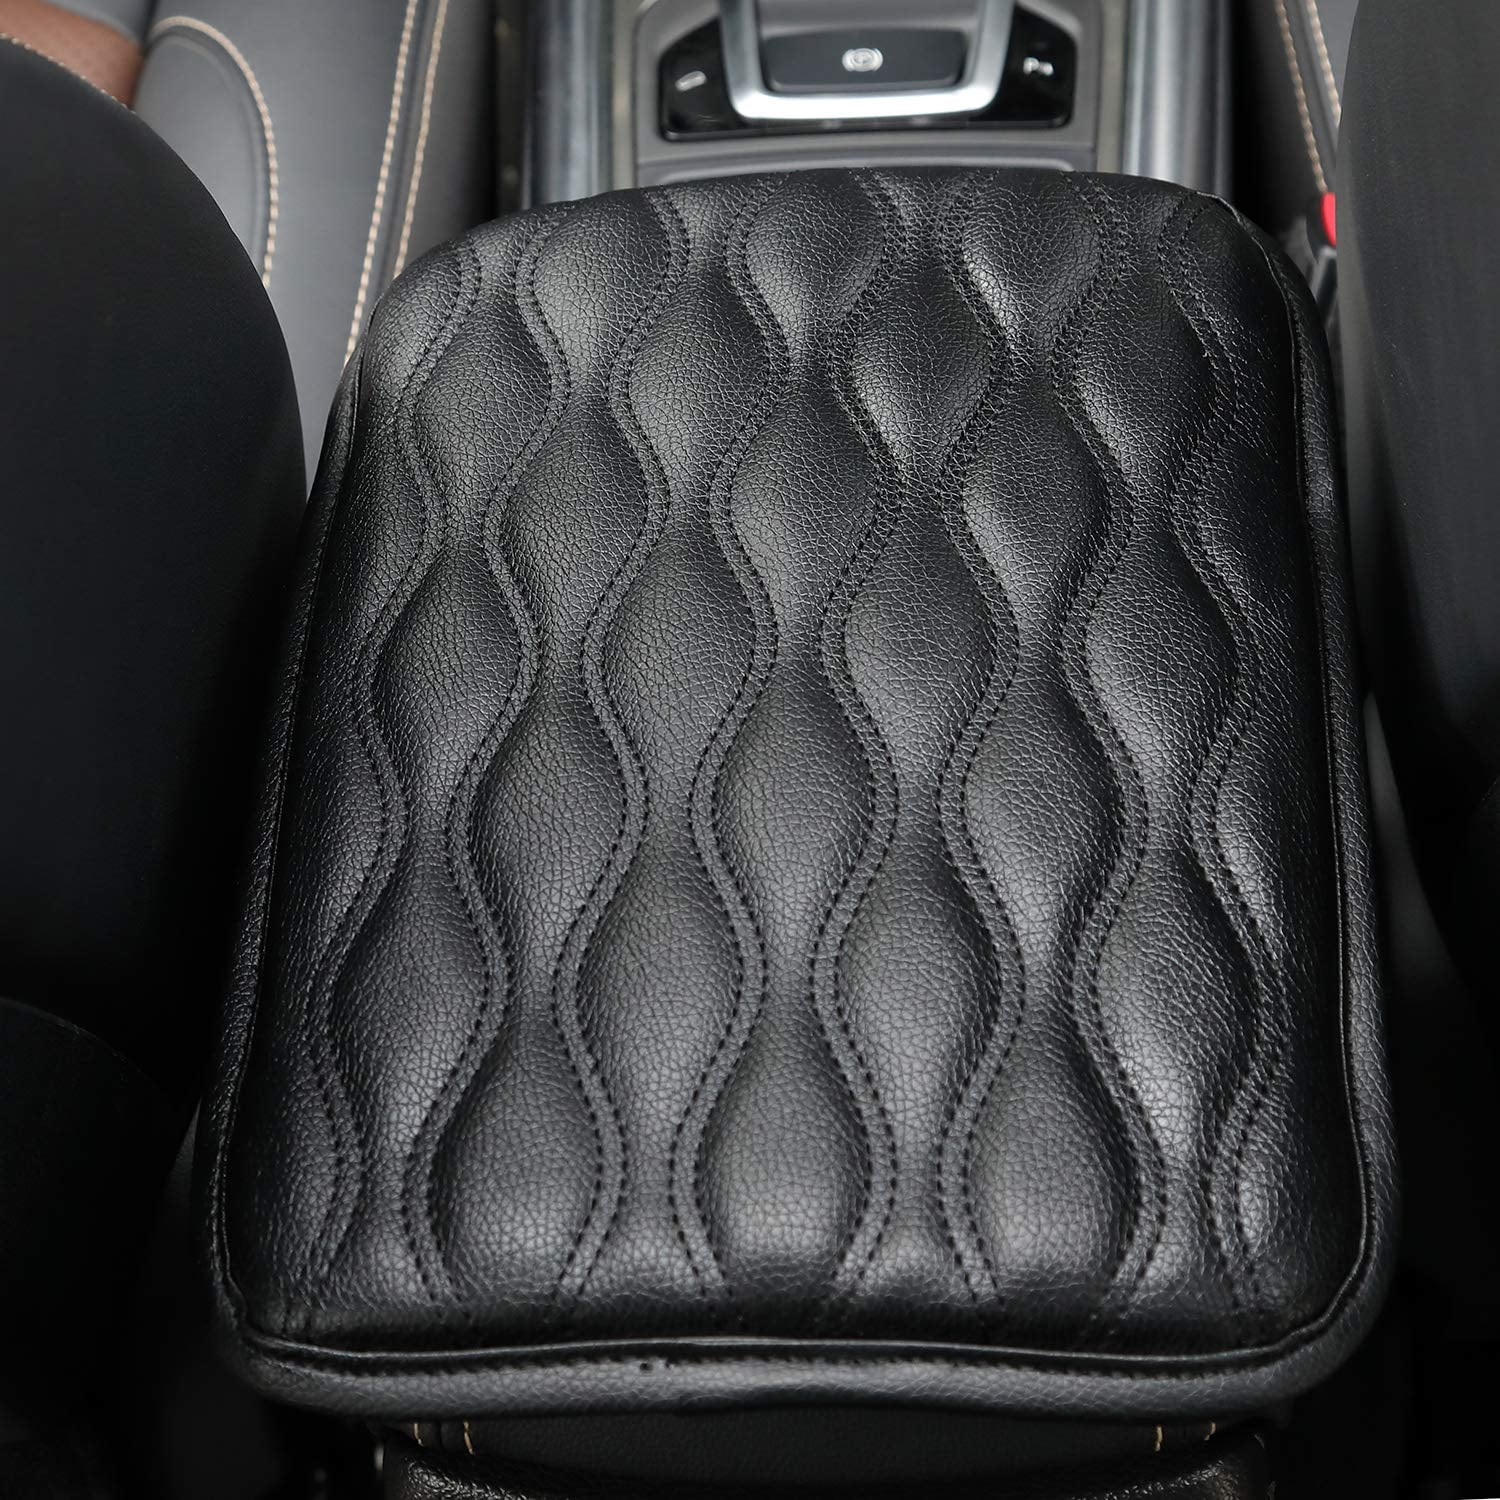 PU Leather Universal Car Armrest Seat Box Cover Cushion Protector Black-01 EGBANG Auto Center Console Pad Console Cover Armrest Pads 